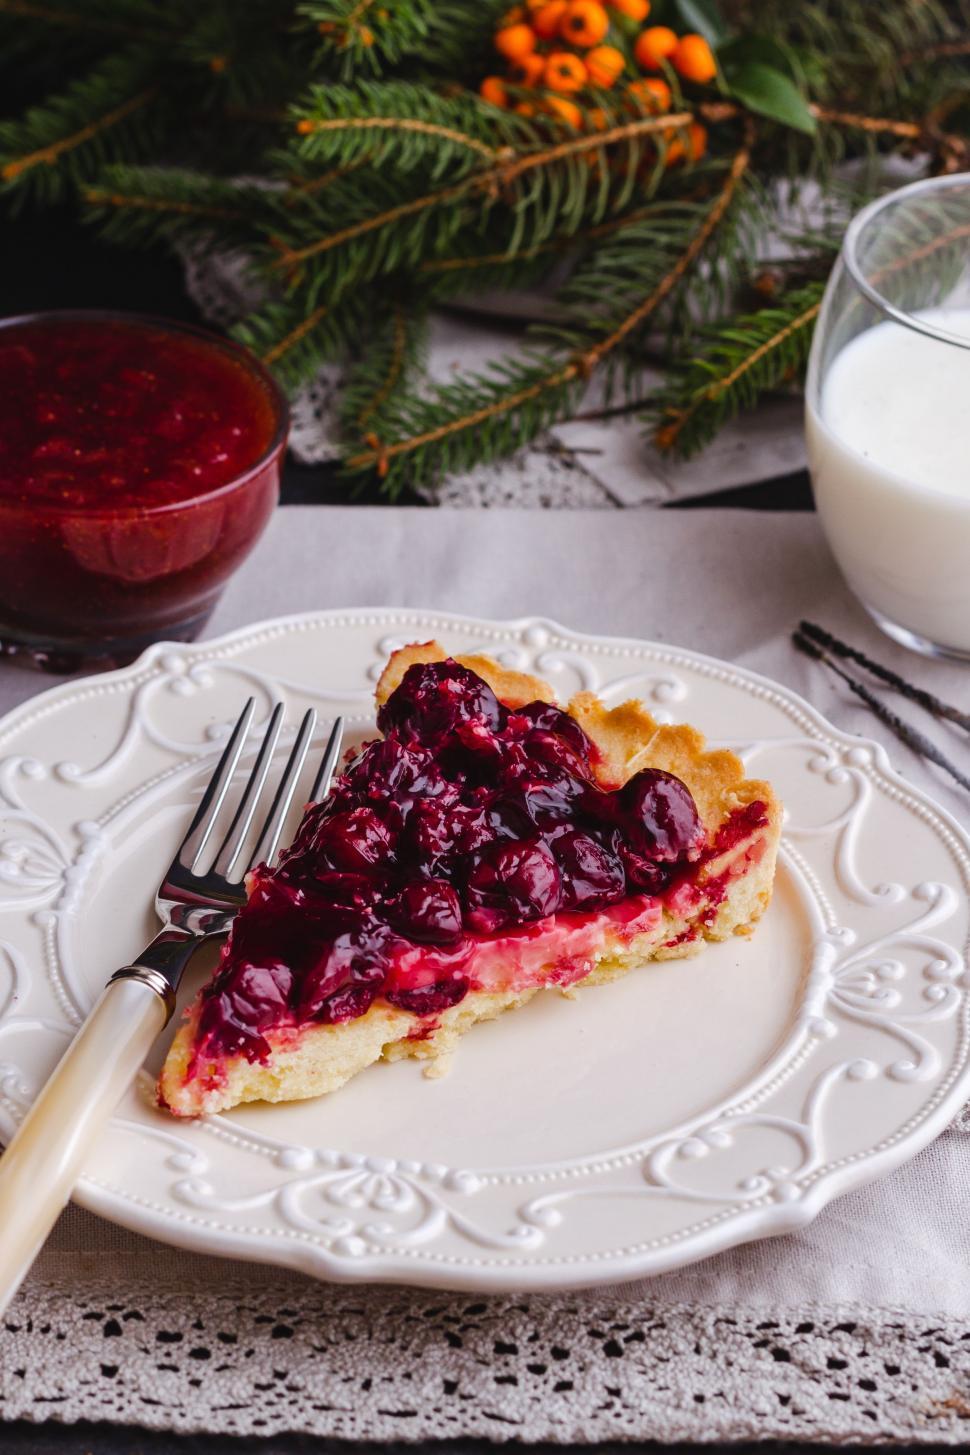 Free Image of White Plate With Slice of Pie 